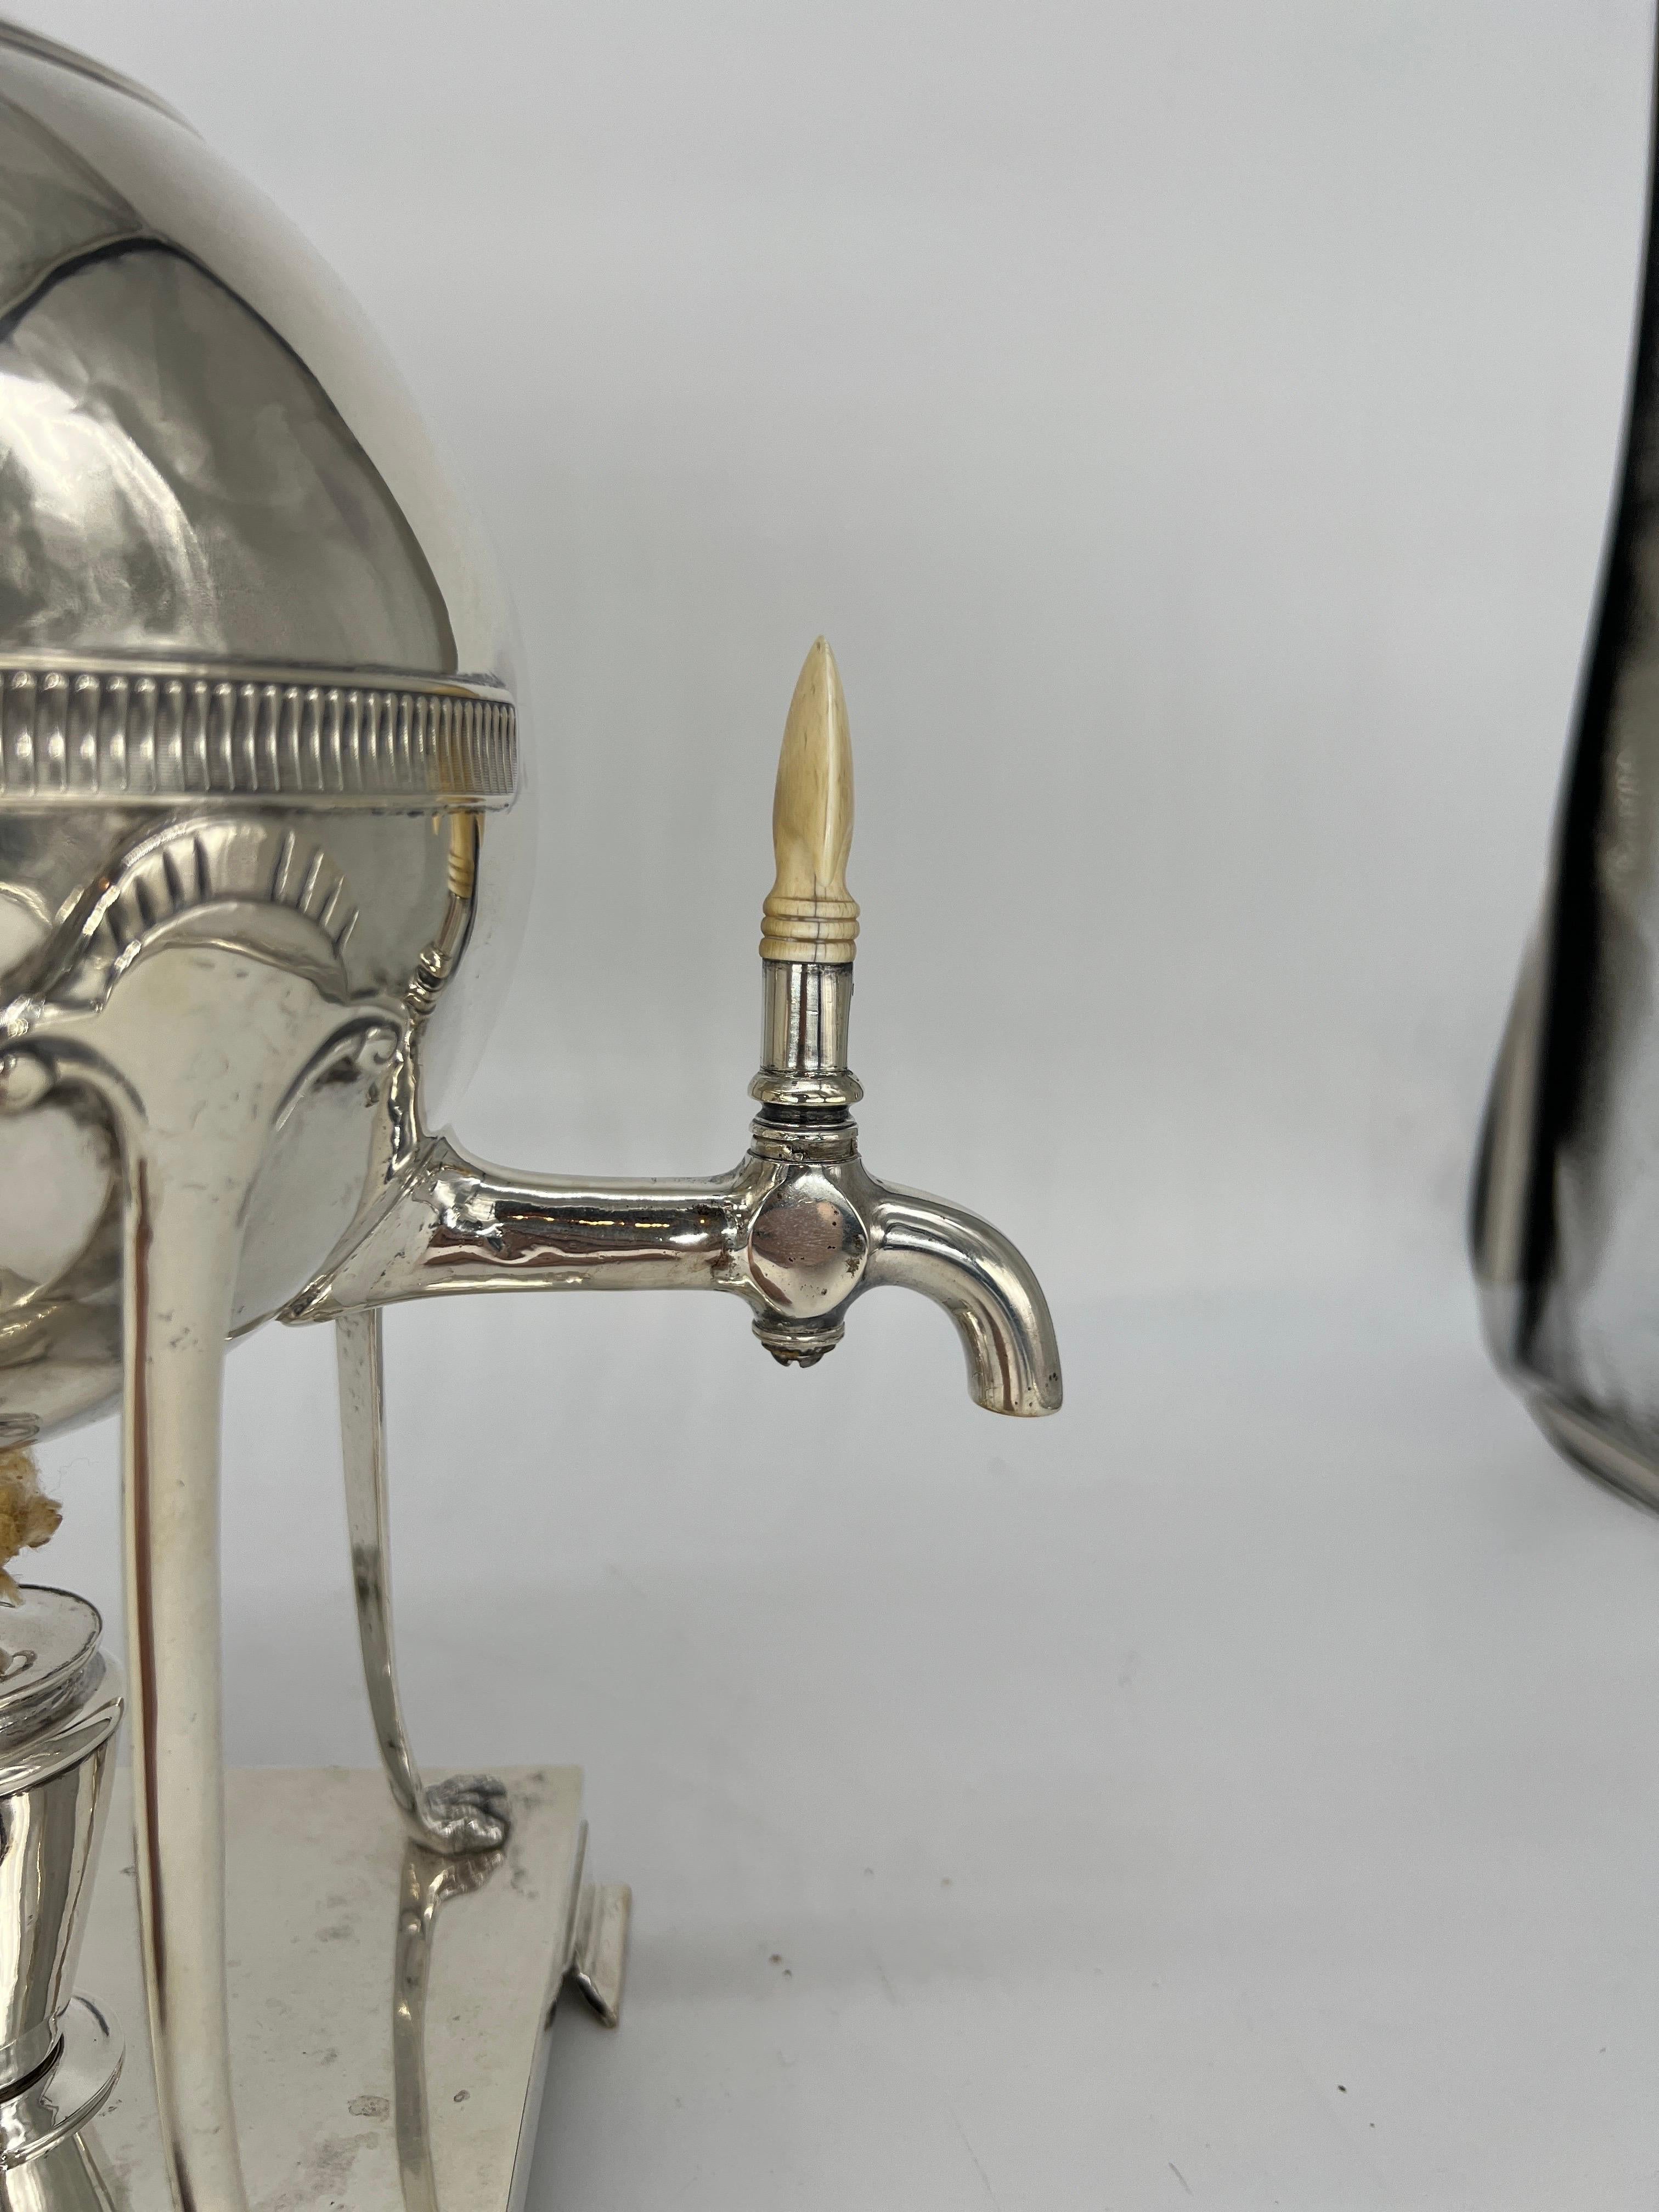 Thomas Kirkpatrick (American - New York, 1832-1920). 
A very fine quality silver plated hot water urn in the neoclassical style. Having a round main body with a reeded band, lion form door knocker handles, four curved supports with paw feet and a